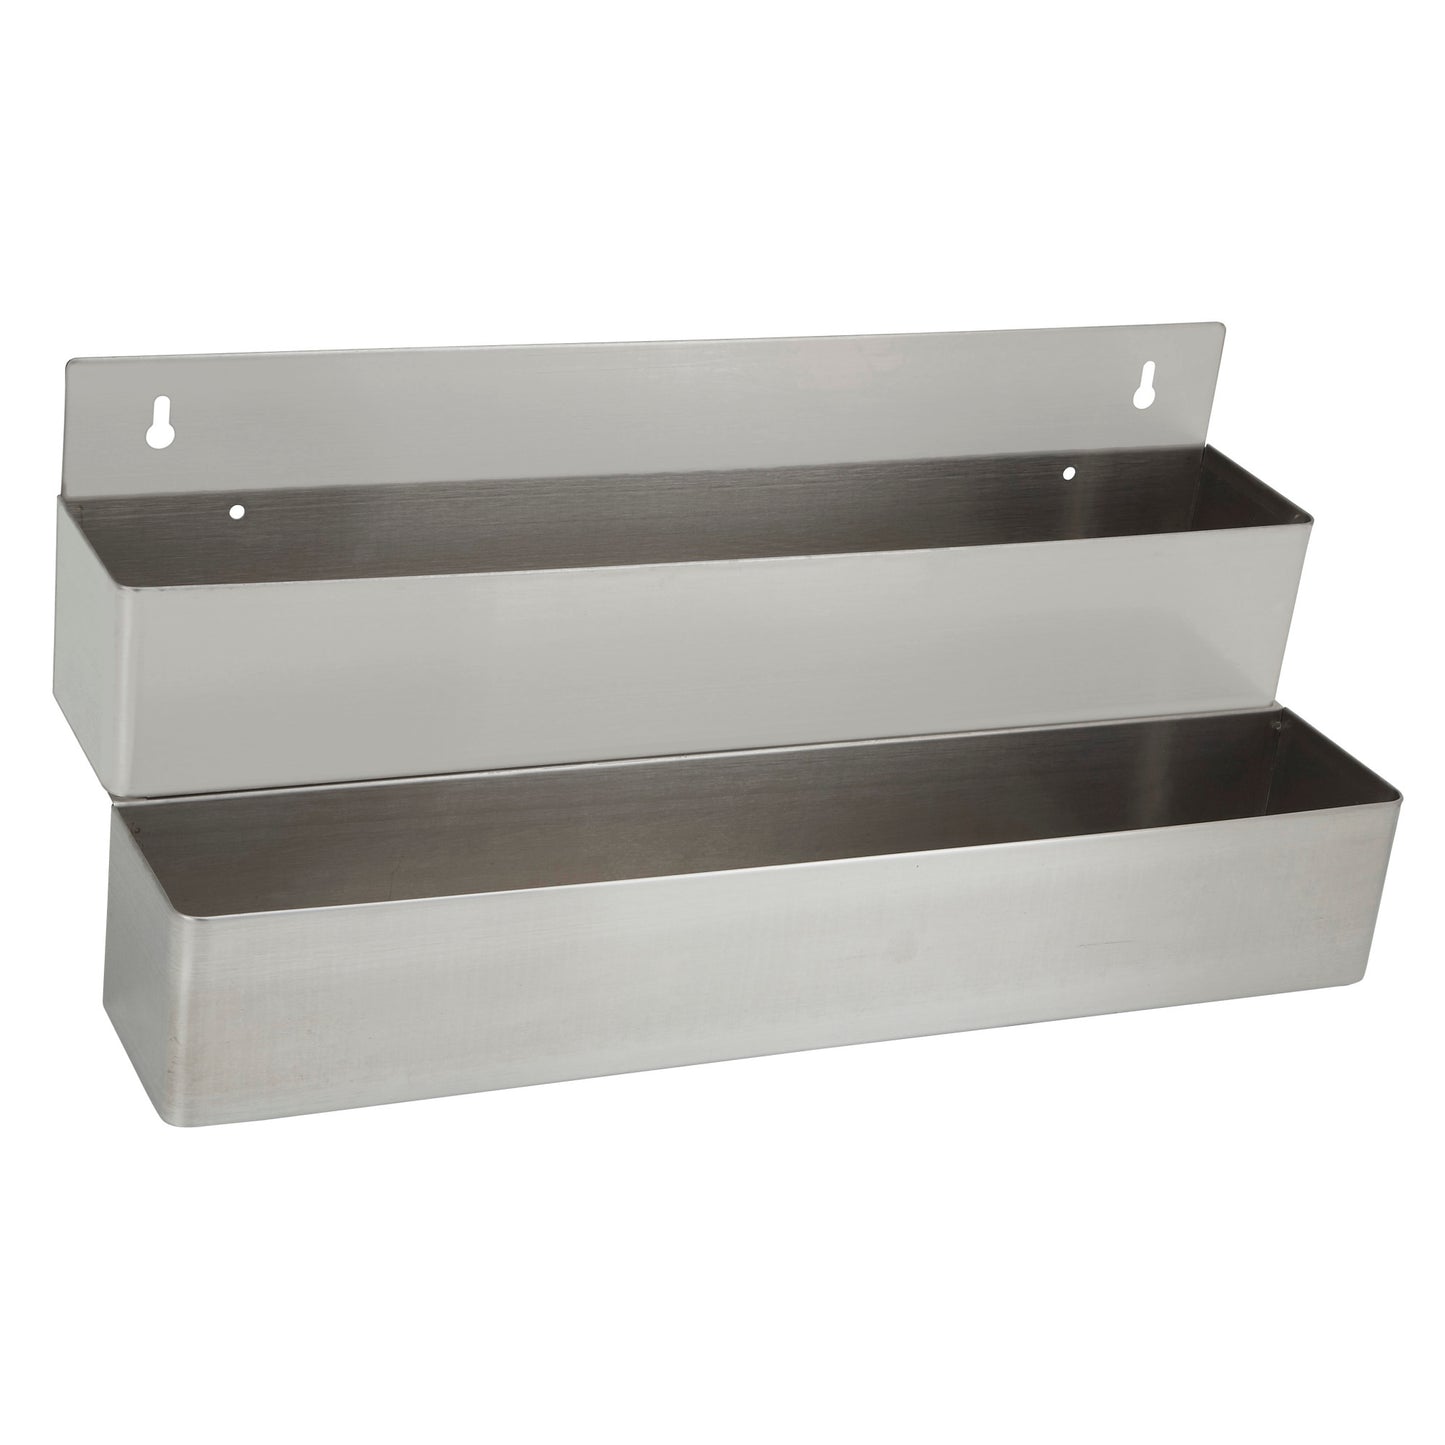 SPR-32D - Double Bar Speed Rail, Stainless Steel - 32"